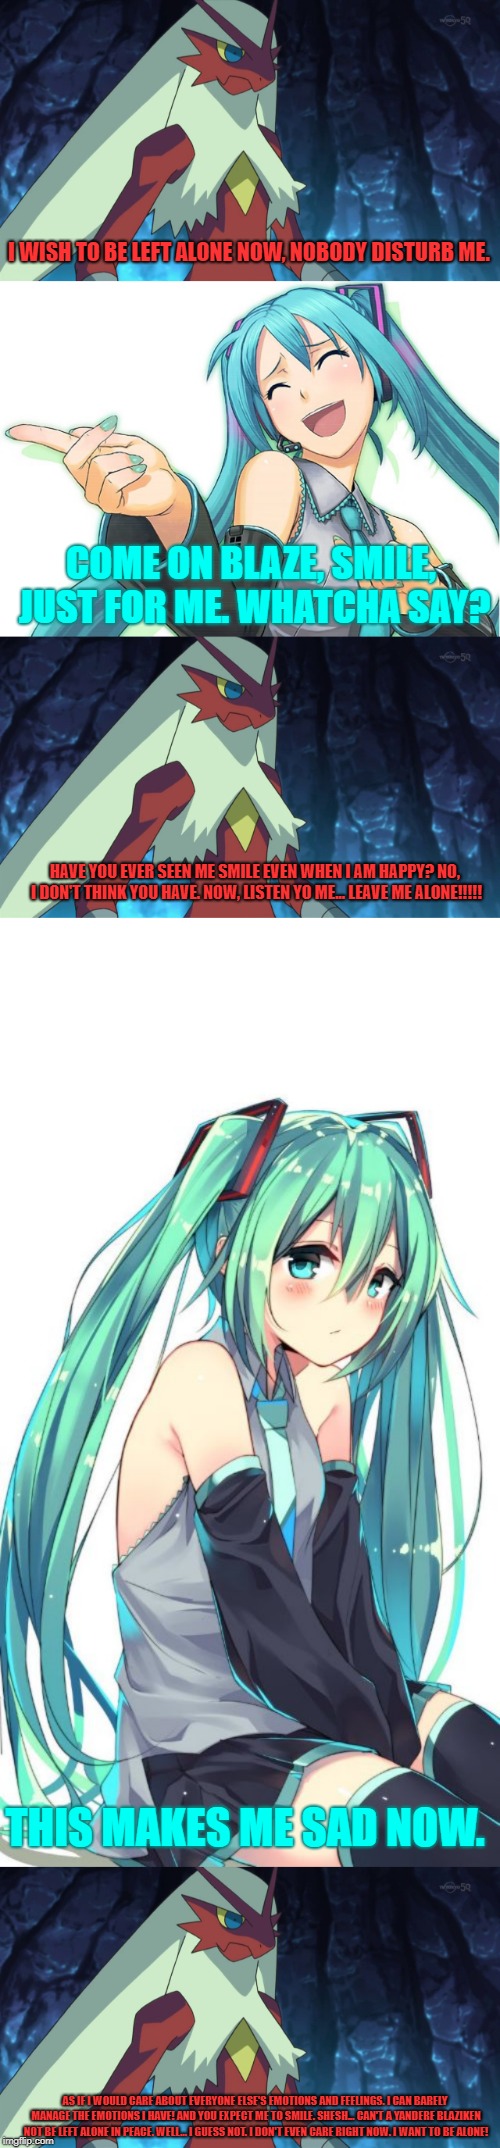 What if: I met Hatsune Miku? Well..... If I had a bad day and I'd met her, this meme just explains it all. | I WISH TO BE LEFT ALONE NOW, NOBODY DISTURB ME. COME ON BLAZE, SMILE, JUST FOR ME. WHATCHA SAY? HAVE YOU EVER SEEN ME SMILE EVEN WHEN I AM HAPPY? NO, I DON'T THINK YOU HAVE. NOW, LISTEN YO ME... LEAVE ME ALONE!!!!! THIS MAKES ME SAD NOW. AS IF I WOULD CARE ABOUT EVERYONE ELSE'S EMOTIONS AND FEELINGS. I CAN BARELY MANAGE THE EMOTIONS I HAVE! AND YOU EXPECT ME TO SMILE. SHESH... CAN'T A YANDERE BLAZIKEN NOT BE LEFT ALONE IN PEACE. WELL... I GUESS NOT. I DON'T EVEN CARE RIGHT NOW. I WANT TO BE ALONE! | image tagged in hatsune miku,blaze the blaziken,what if | made w/ Imgflip meme maker